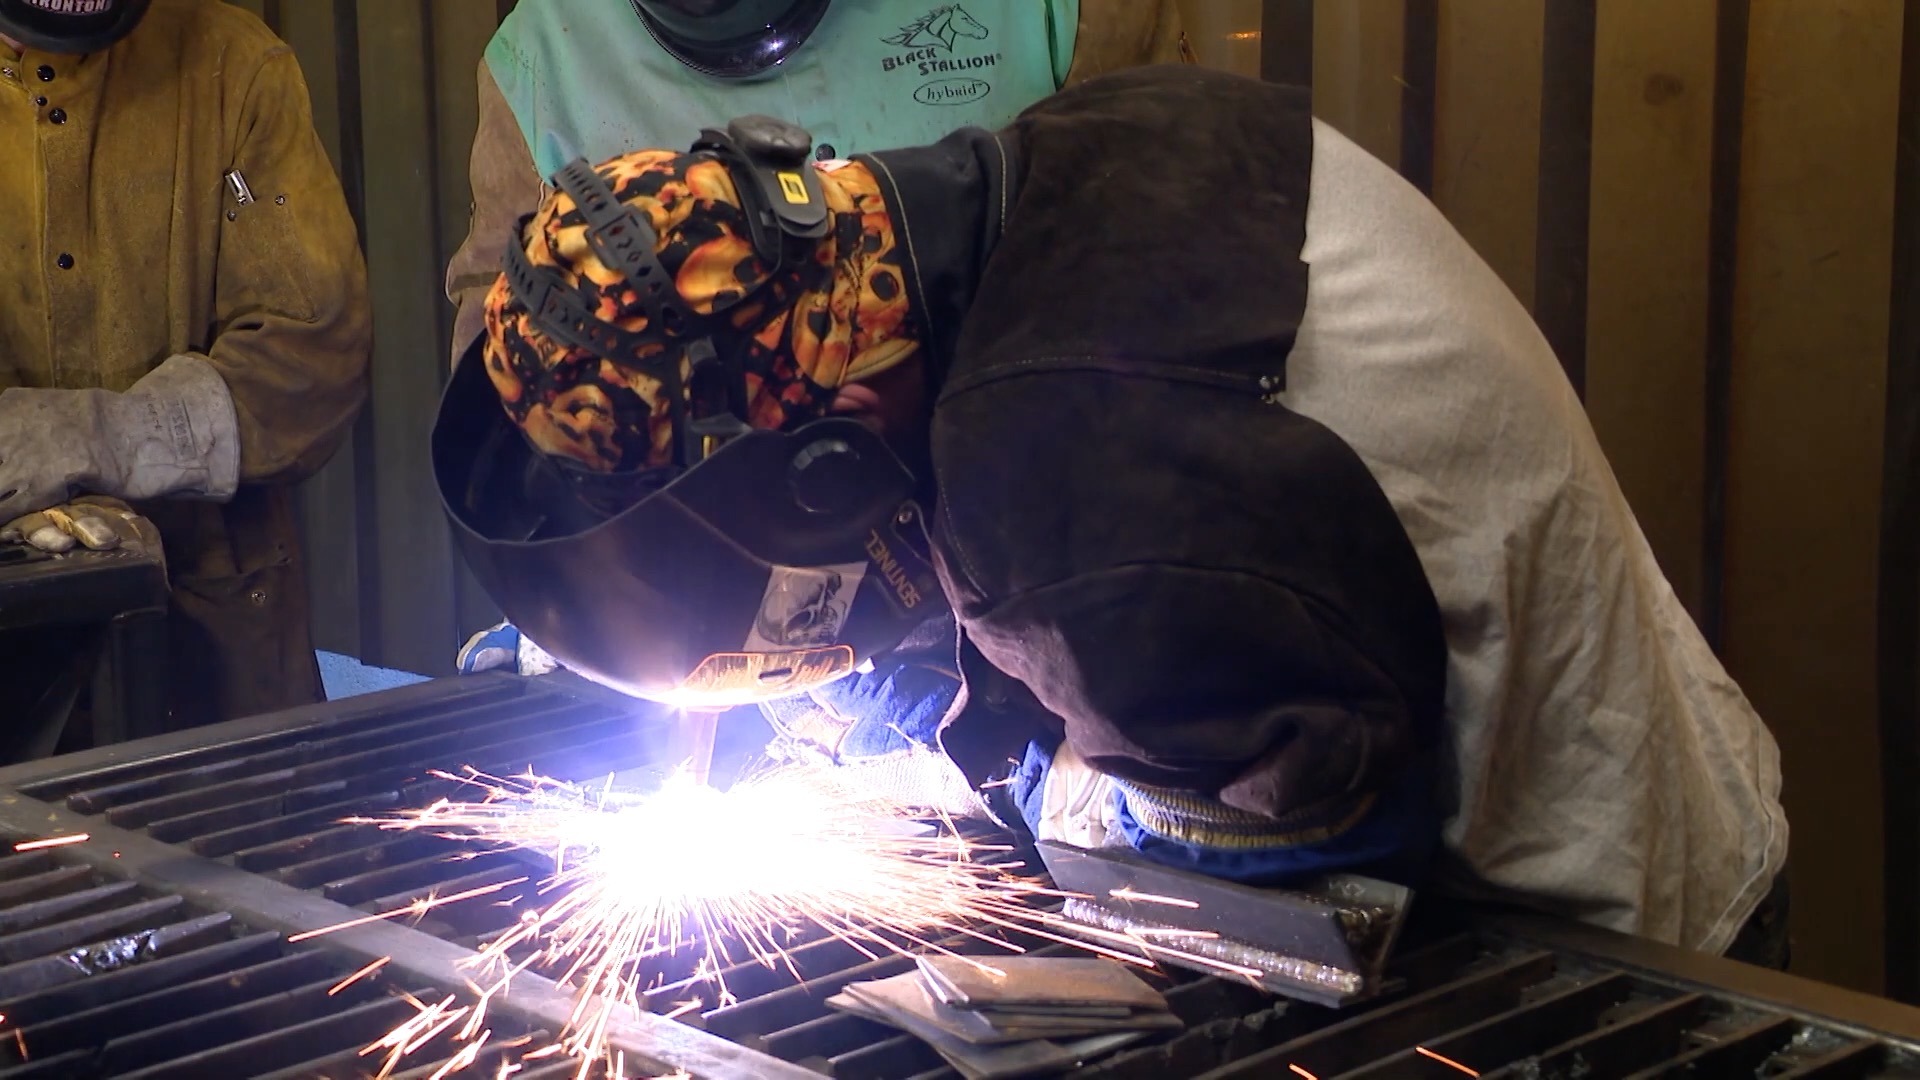 Welding program students working on a project